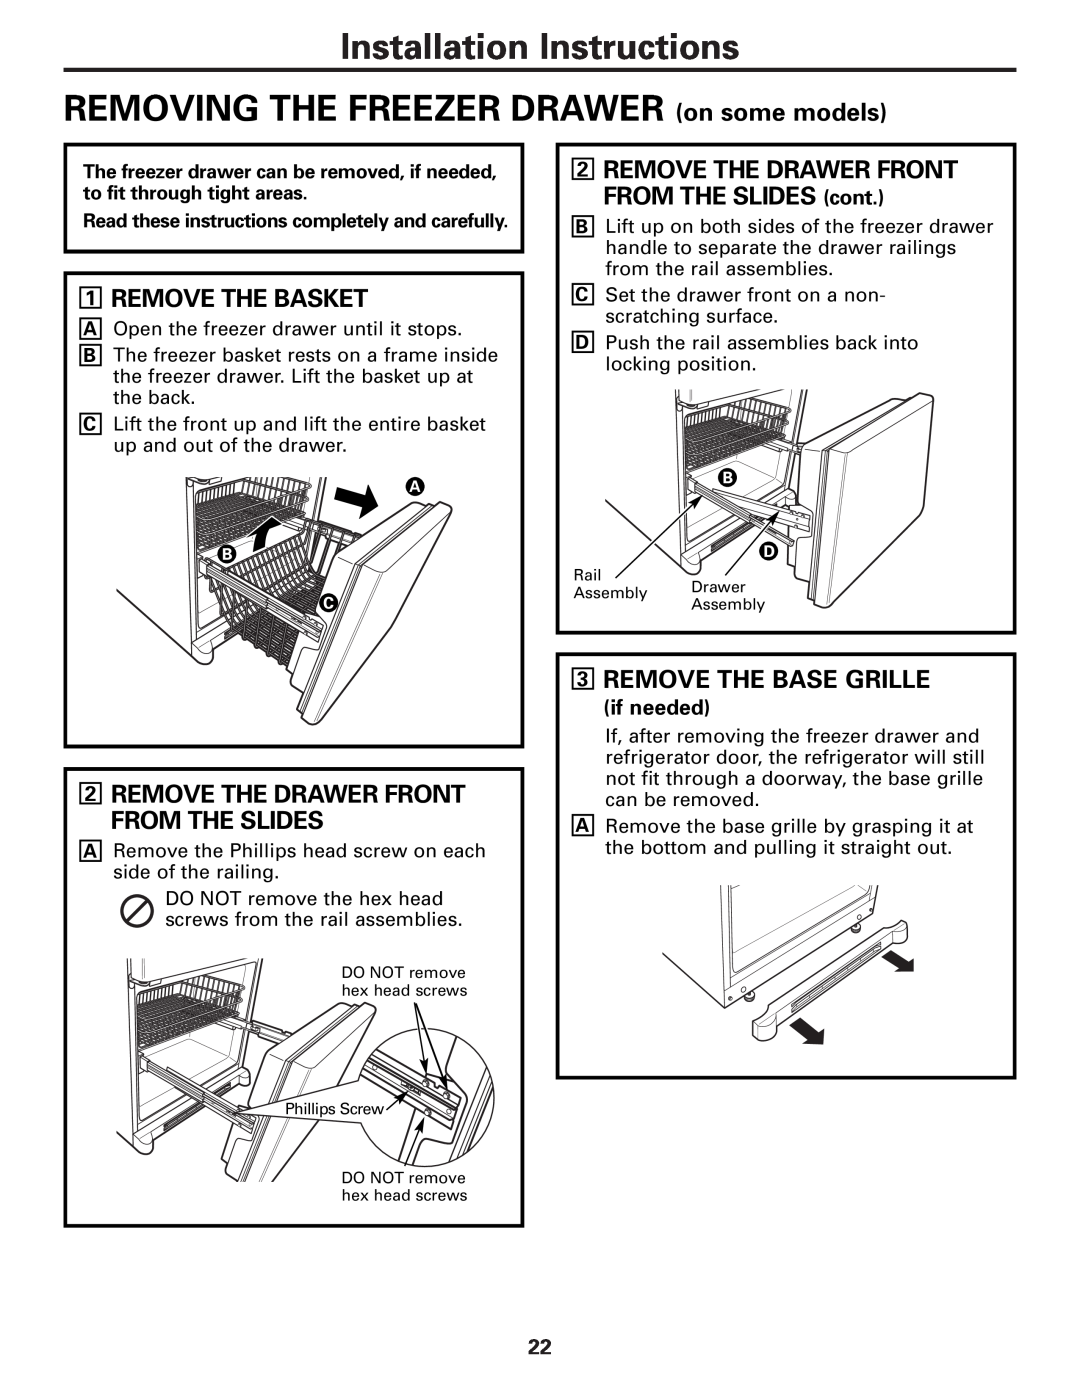 GE GDL22KCWSS manual Installation Instructions REMOVING THE FREEZER DRAWER on some models, Remove The Basket, if needed 